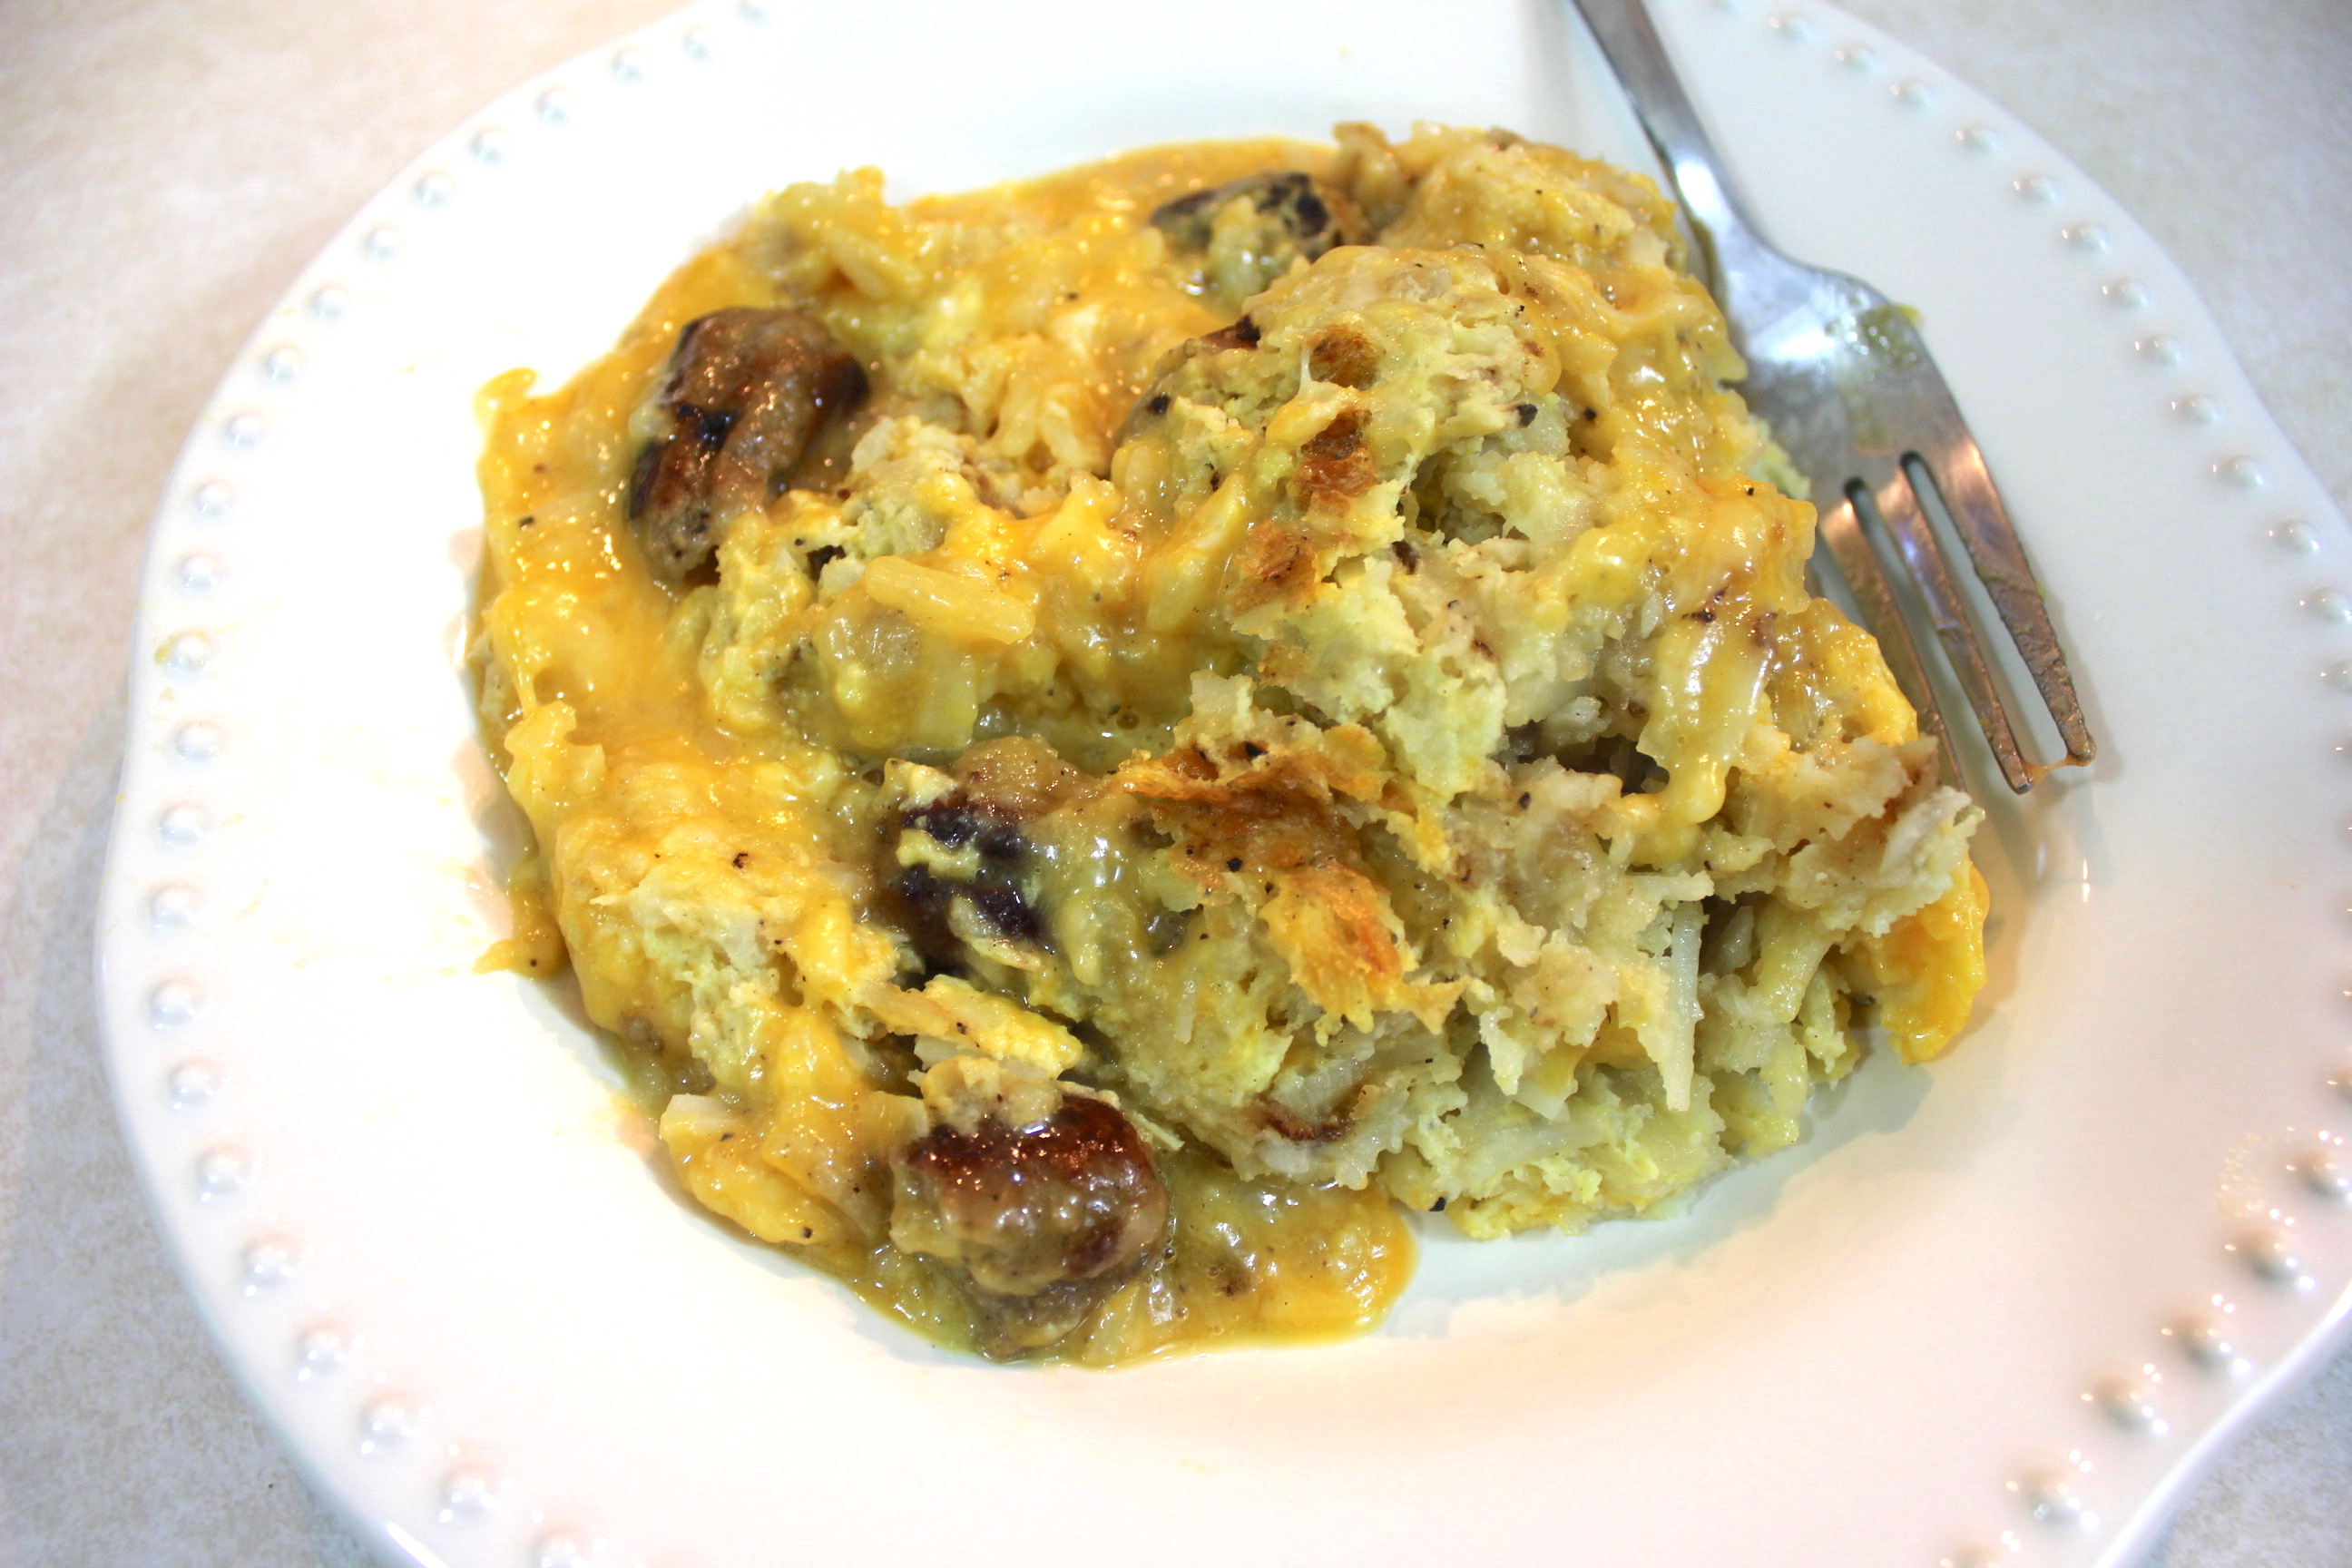 Breakfast casserole with hash browns, eggs and sausage